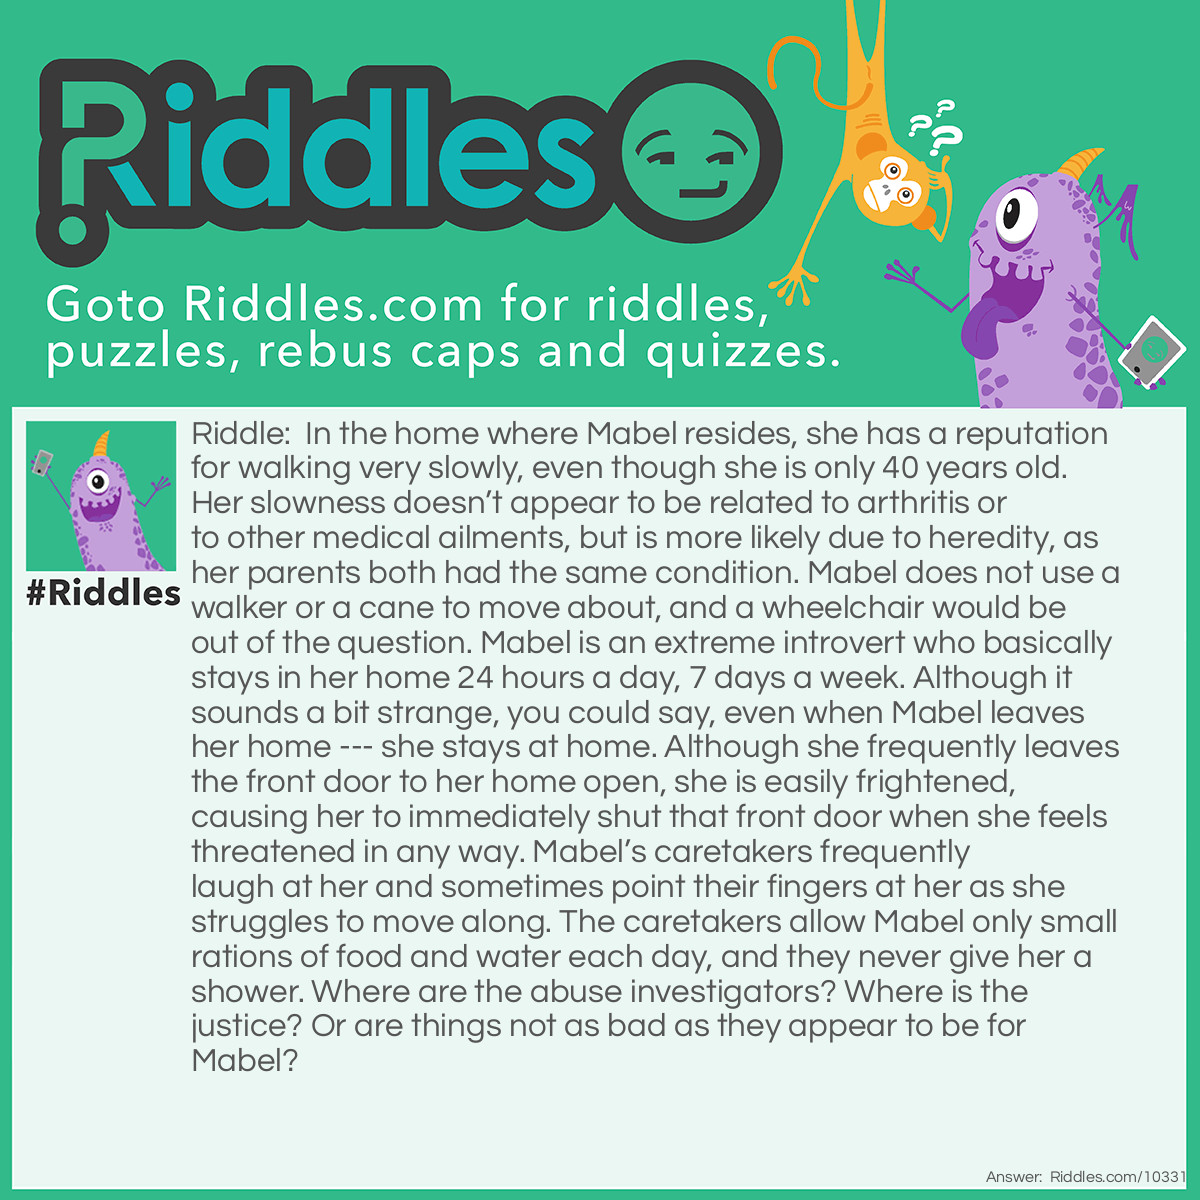 Riddle: In the home where Mabel resides, she has a reputation for walking very slowly, even though she is only 40 years old. Her slowness doesn't appear to be related to arthritis or to other medical ailments, but is more likely due to heredity, as her parents both had the same condition. Mabel does not use a walker or a cane to move about, and a wheelchair would be out of the question. Mabel is an extreme introvert who basically stays in her home 24 hours a day, 7 days a week. Although it sounds a bit strange, you could say, even when Mabel leaves her home --- she stays at home. Although she frequently leaves the front door to her home open, she is easily frightened, causing her to immediately shut that front door when she feels threatened in any way. Mabel's caretakers frequently laugh at her and sometimes point their fingers at her as she struggles to move along. The caretakers allow Mabel only small rations of food and water each day, and they never give her a shower. Where are the abuse investigators? Where is the justice? Or are things not as bad as they appear to be for Mabel? Answer: Mabel is a Box Turtle who is the house pet of a family with several children. She is well cared for, but instinctively closes the front door of her shell and pulls her legs in if she senses danger, which includes inquisitive children.